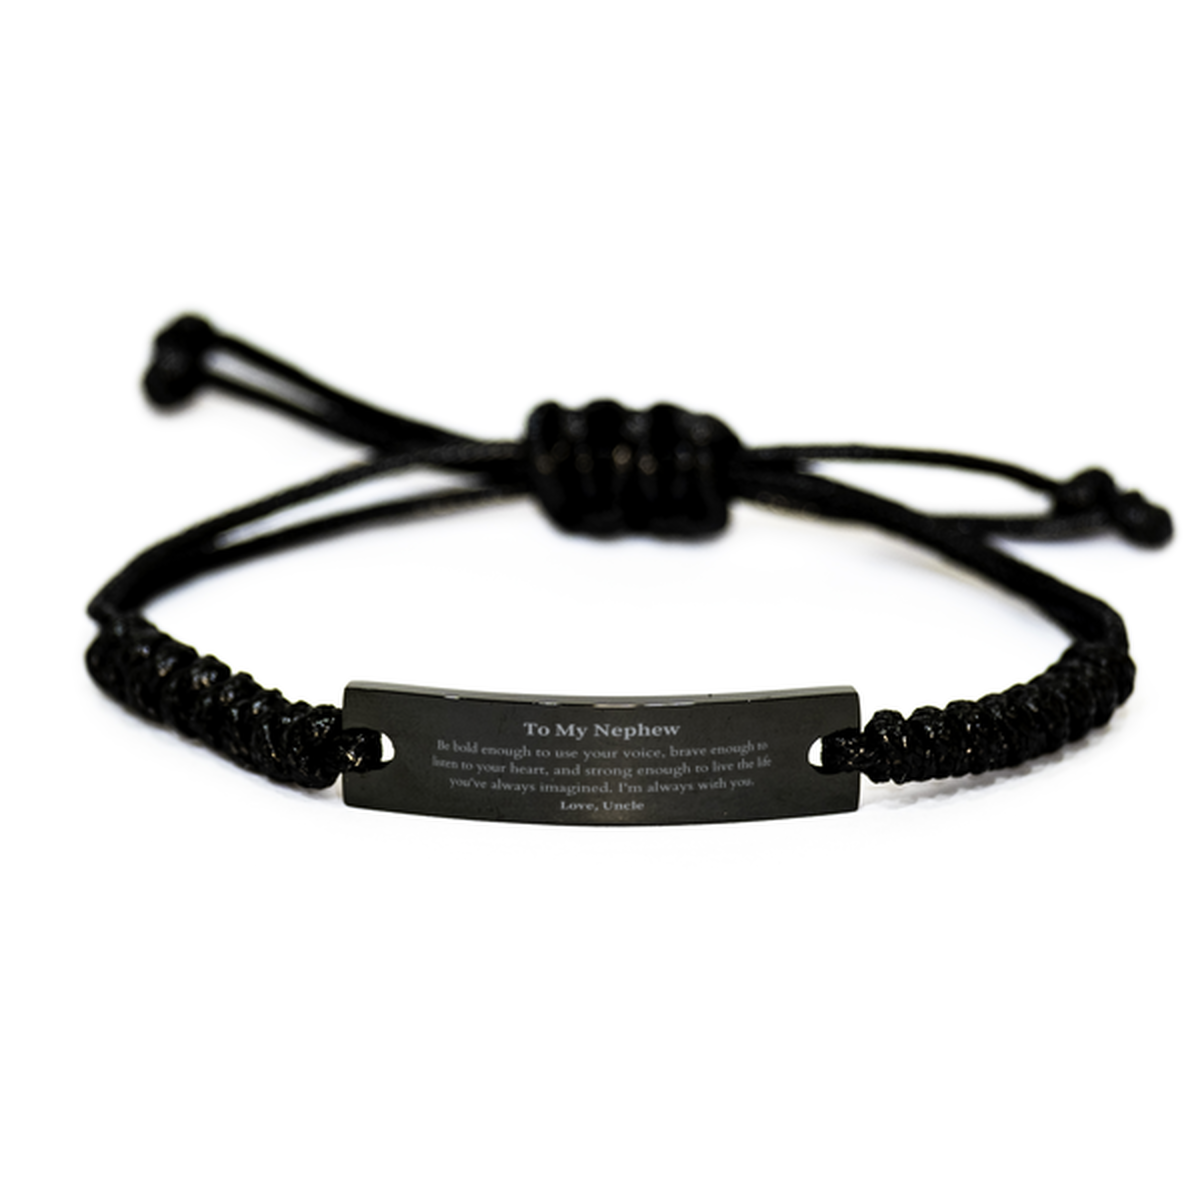 Keepsake Nephew Black Rope Bracelet Gift Idea Graduation Christmas Birthday Nephew from Uncle, Nephew Be bold enough to use your voice, brave enough to listen to your heart. Love, Uncle